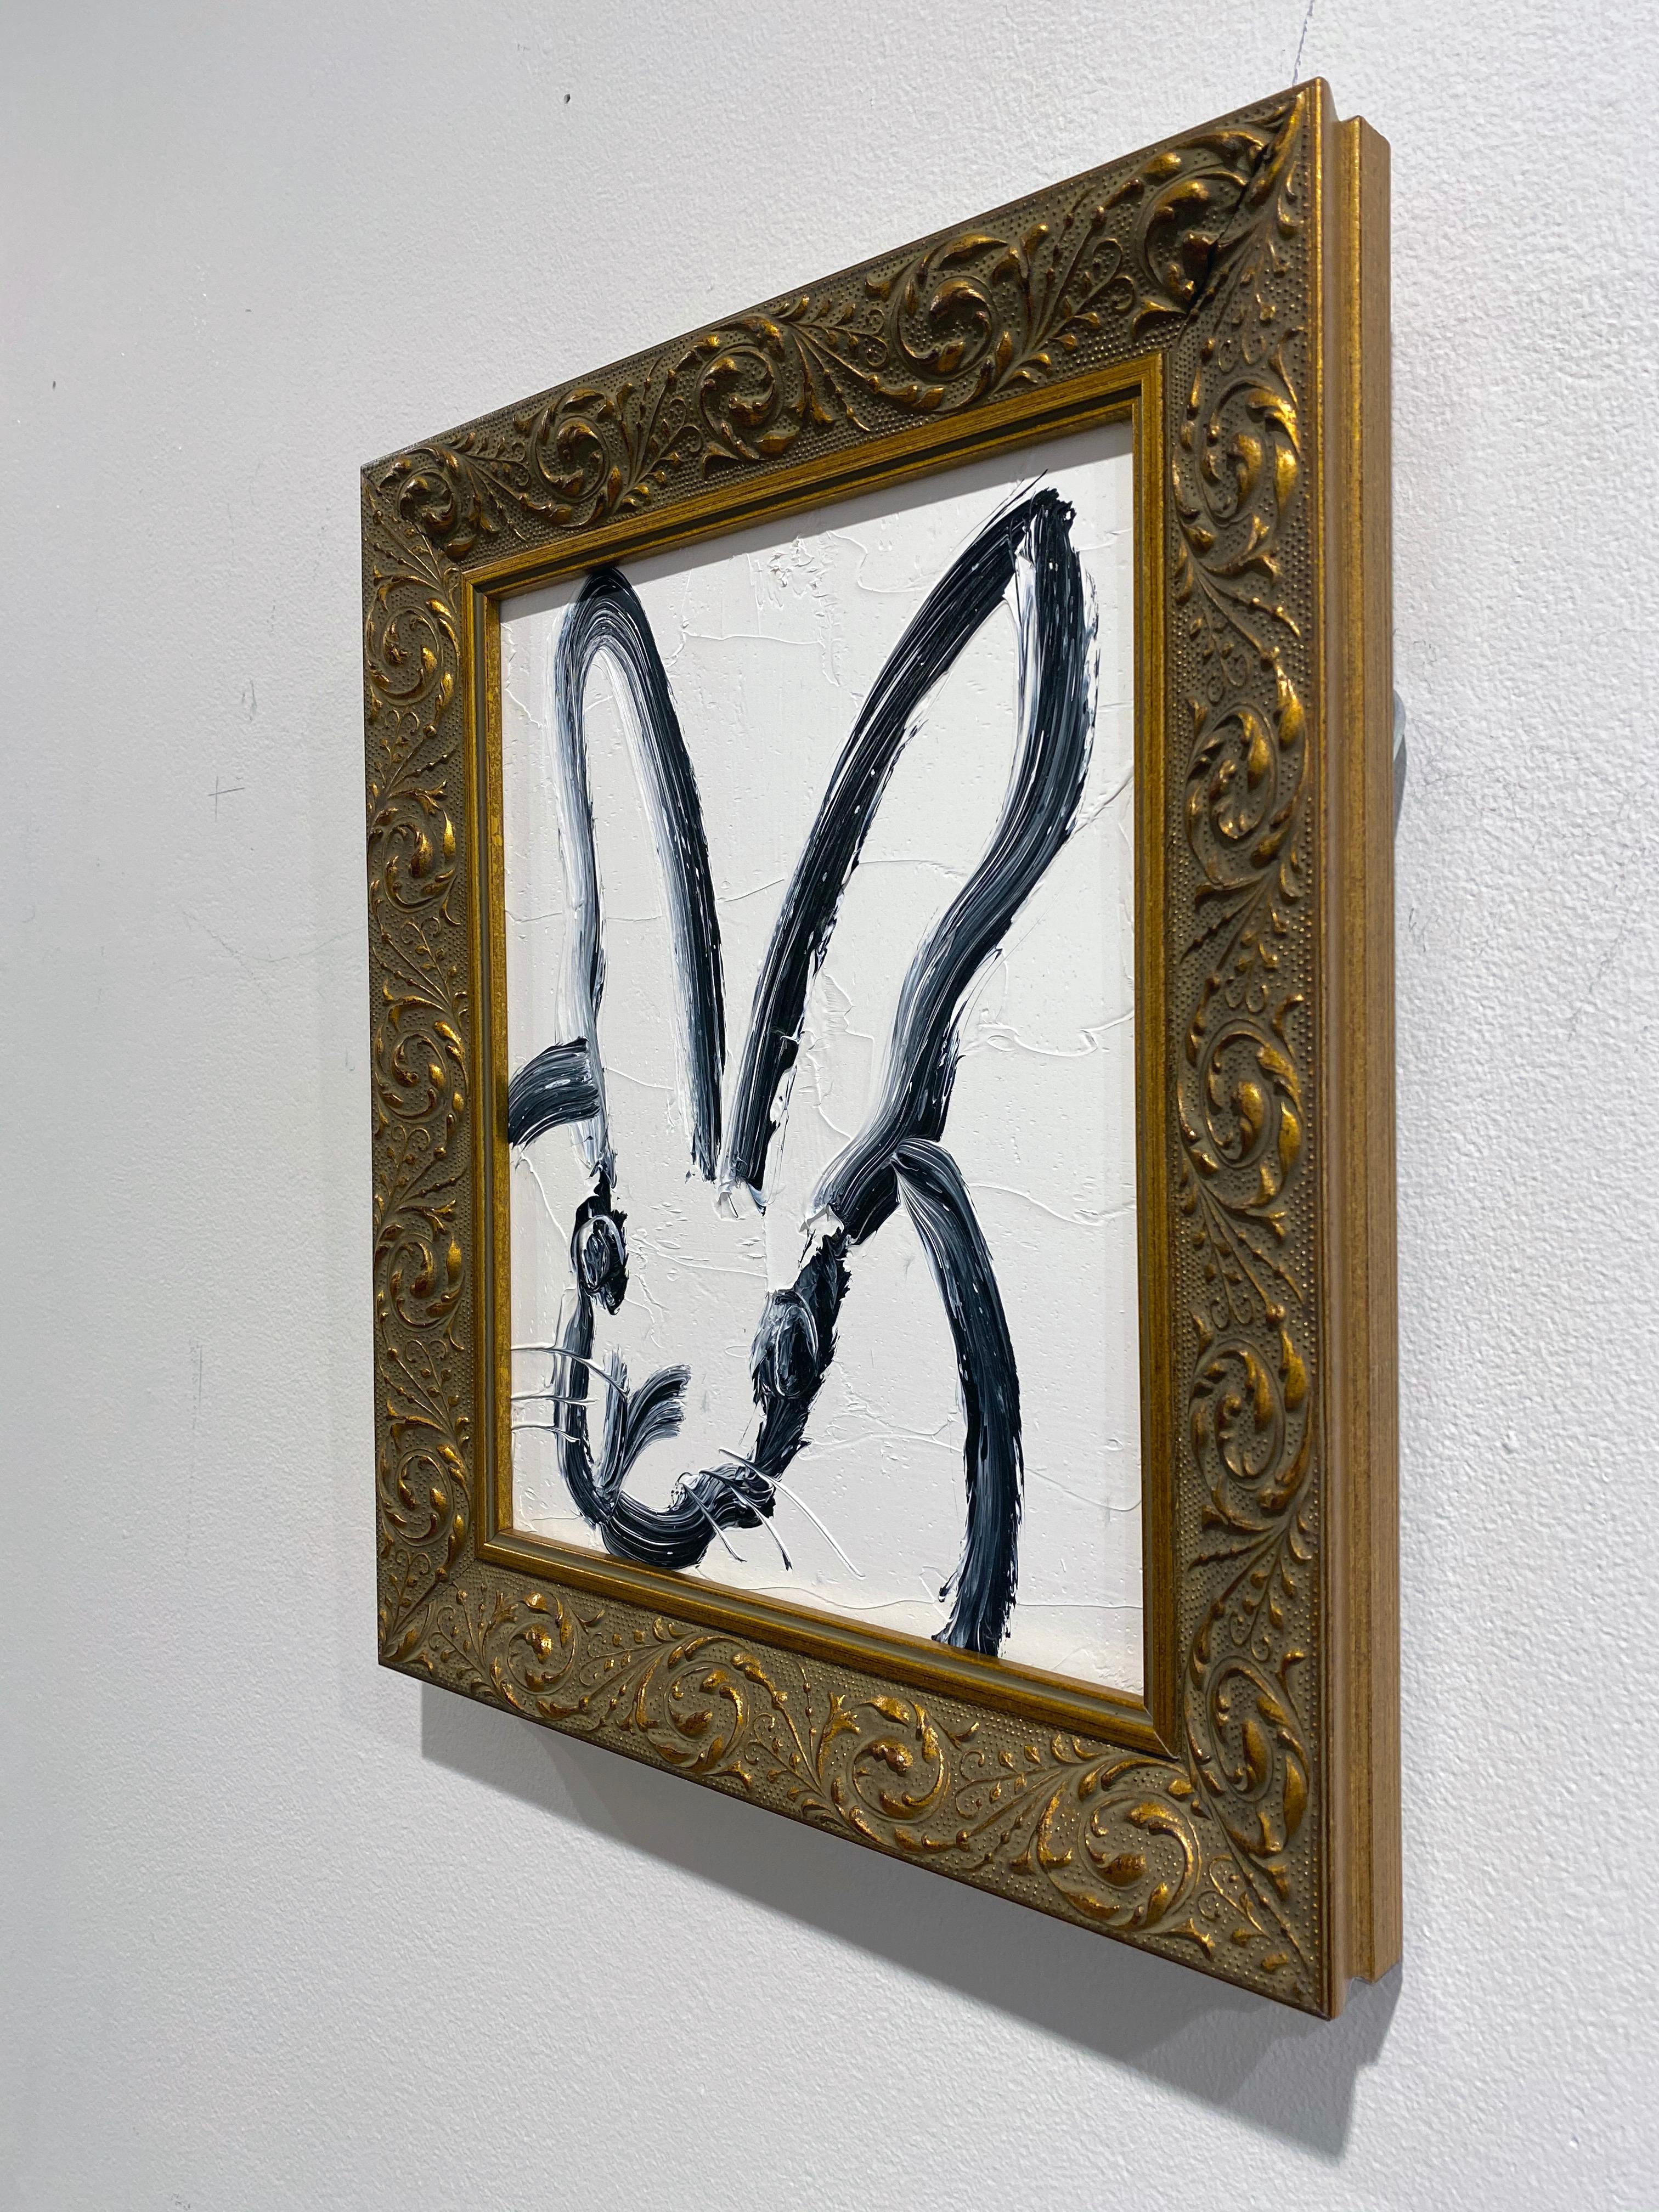 'Untitled' by Hunt Slonem, 2020. Oil on wood, 10 x 8 in. Framed size is 13 x 10.5 in. This painting features Slonem's signature bunny outlined in black on a bright white background. Framed in a decorative gold frame.

Considered one of the great